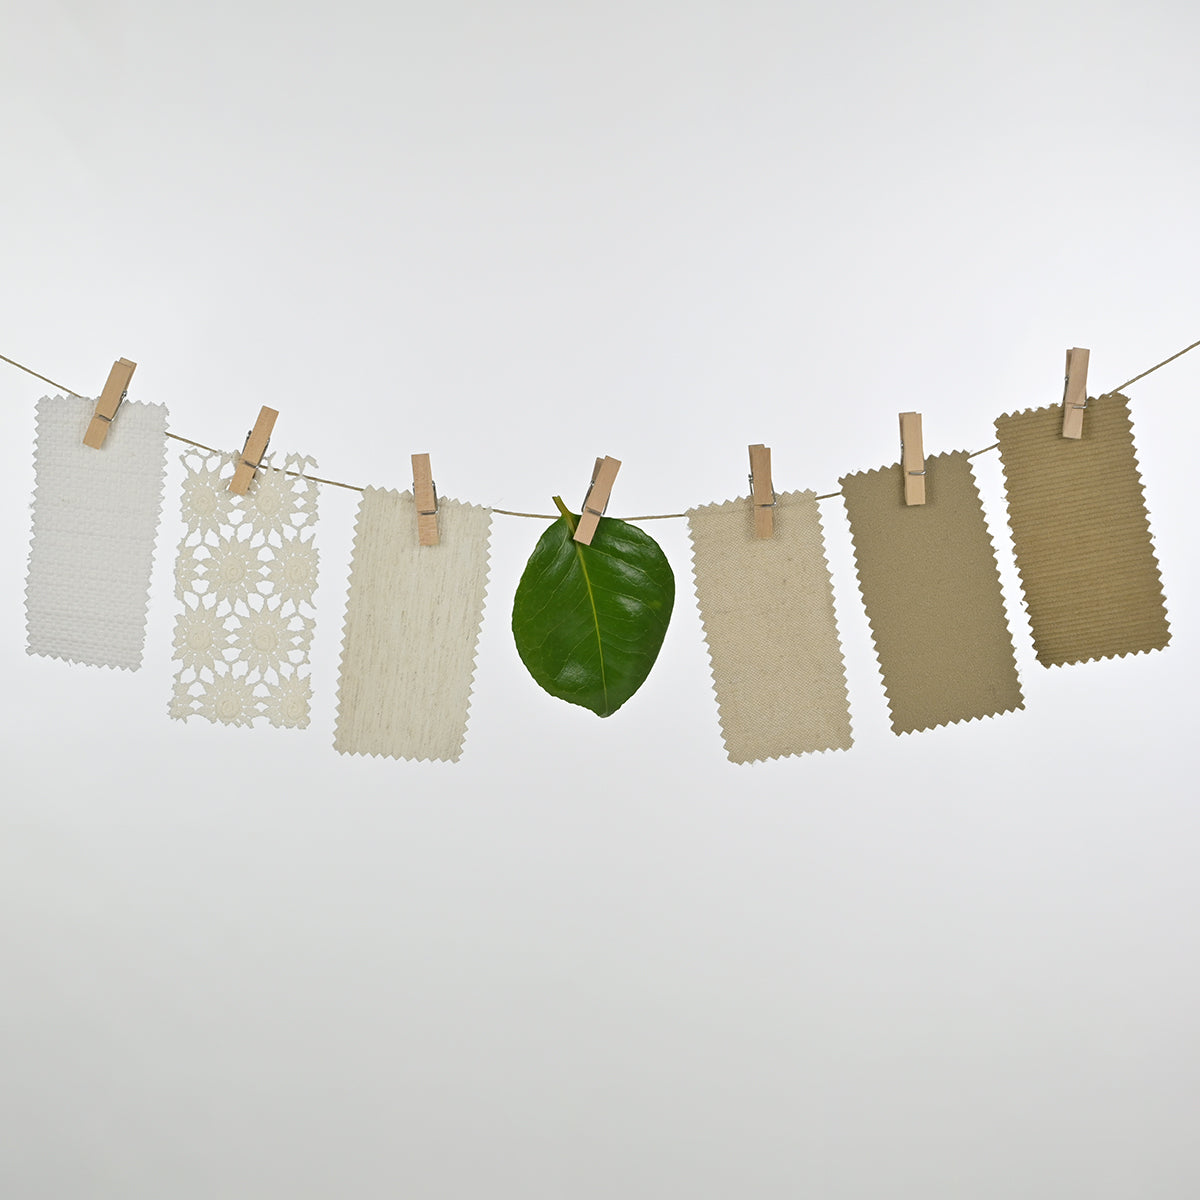 sustainability represented by six fabric samples attached to a wire with springs and a green leaf in the middle